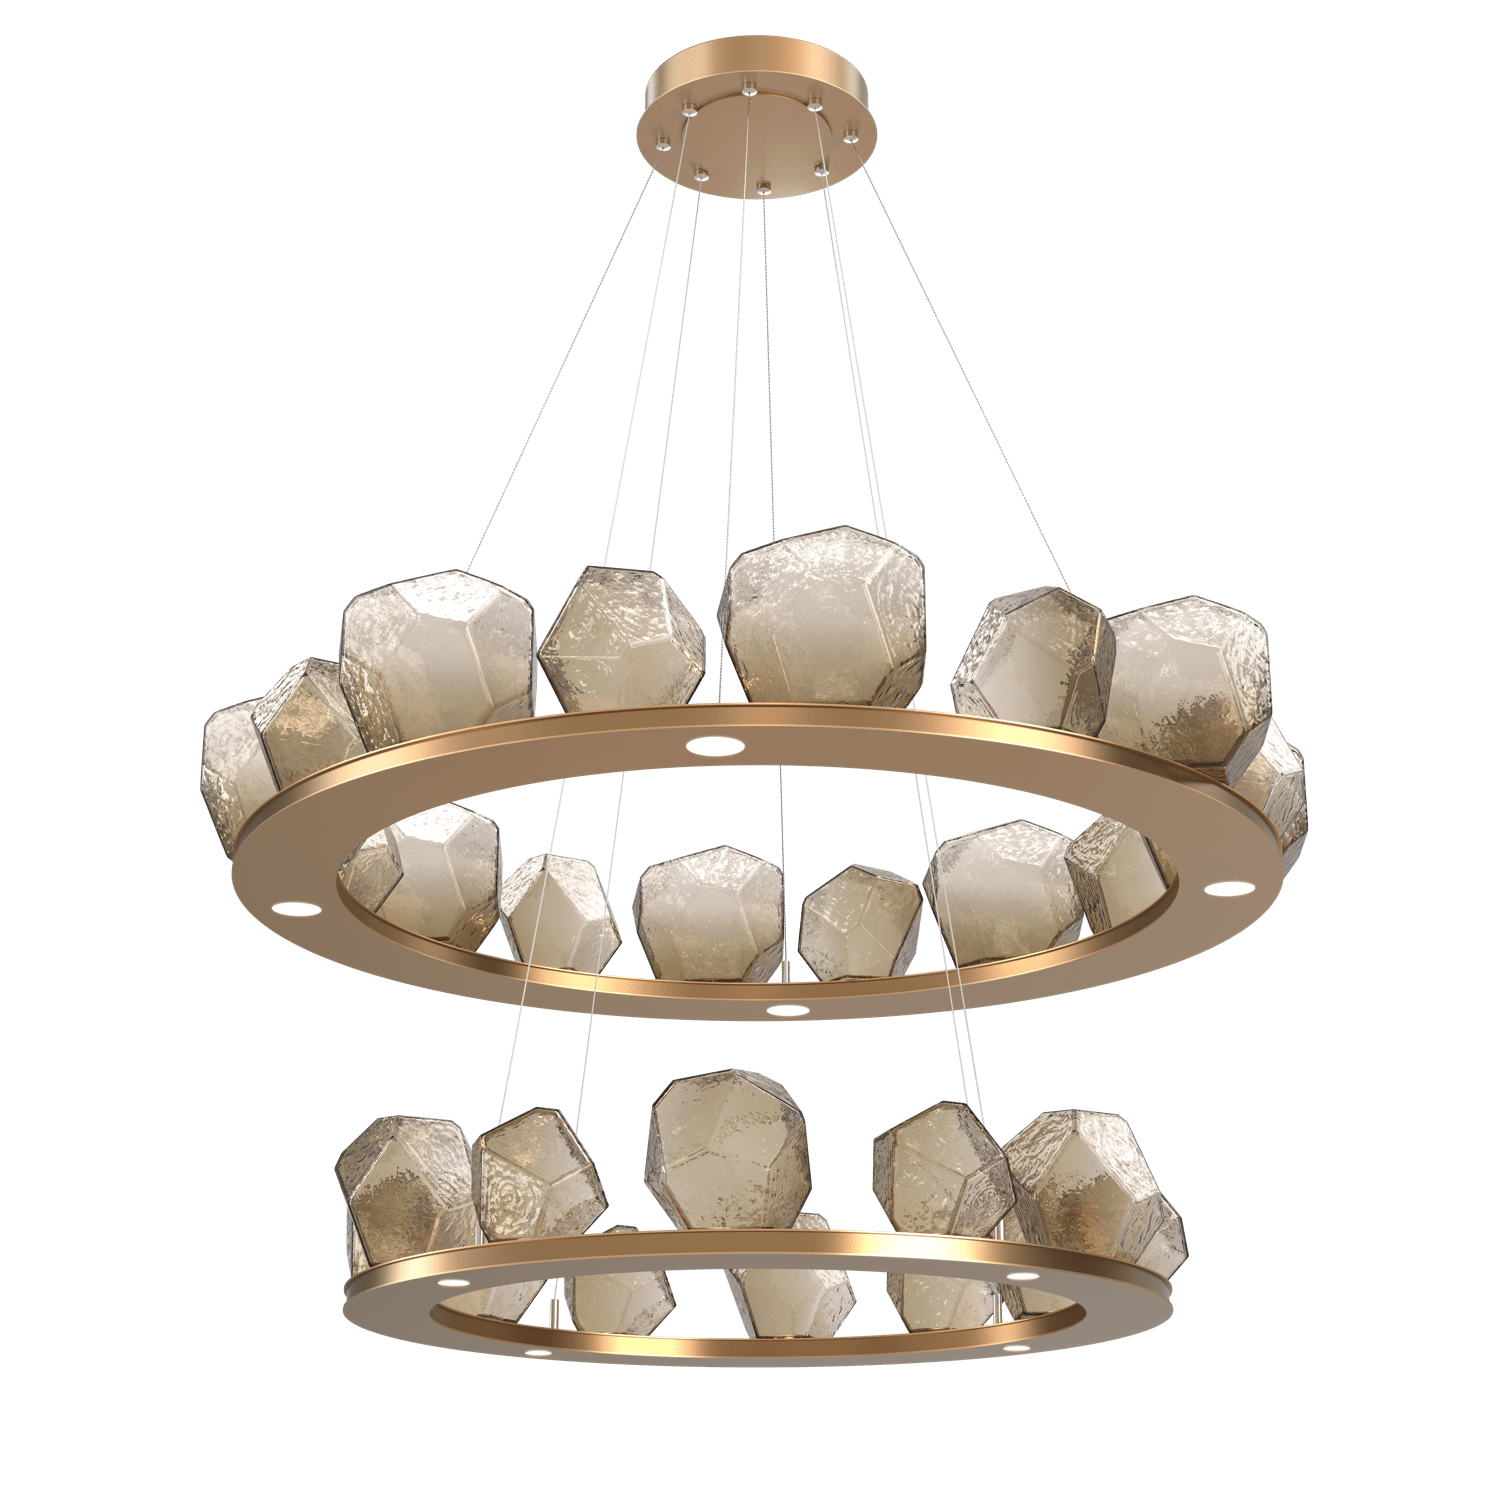 CHB0039-2B-NB-B-Hammerton-Studio-Gem-48-inch-two-tier-ring-chandelier-with-novel-brass-finish-and-bronze-blown-glass-shades-and-LED-lamping